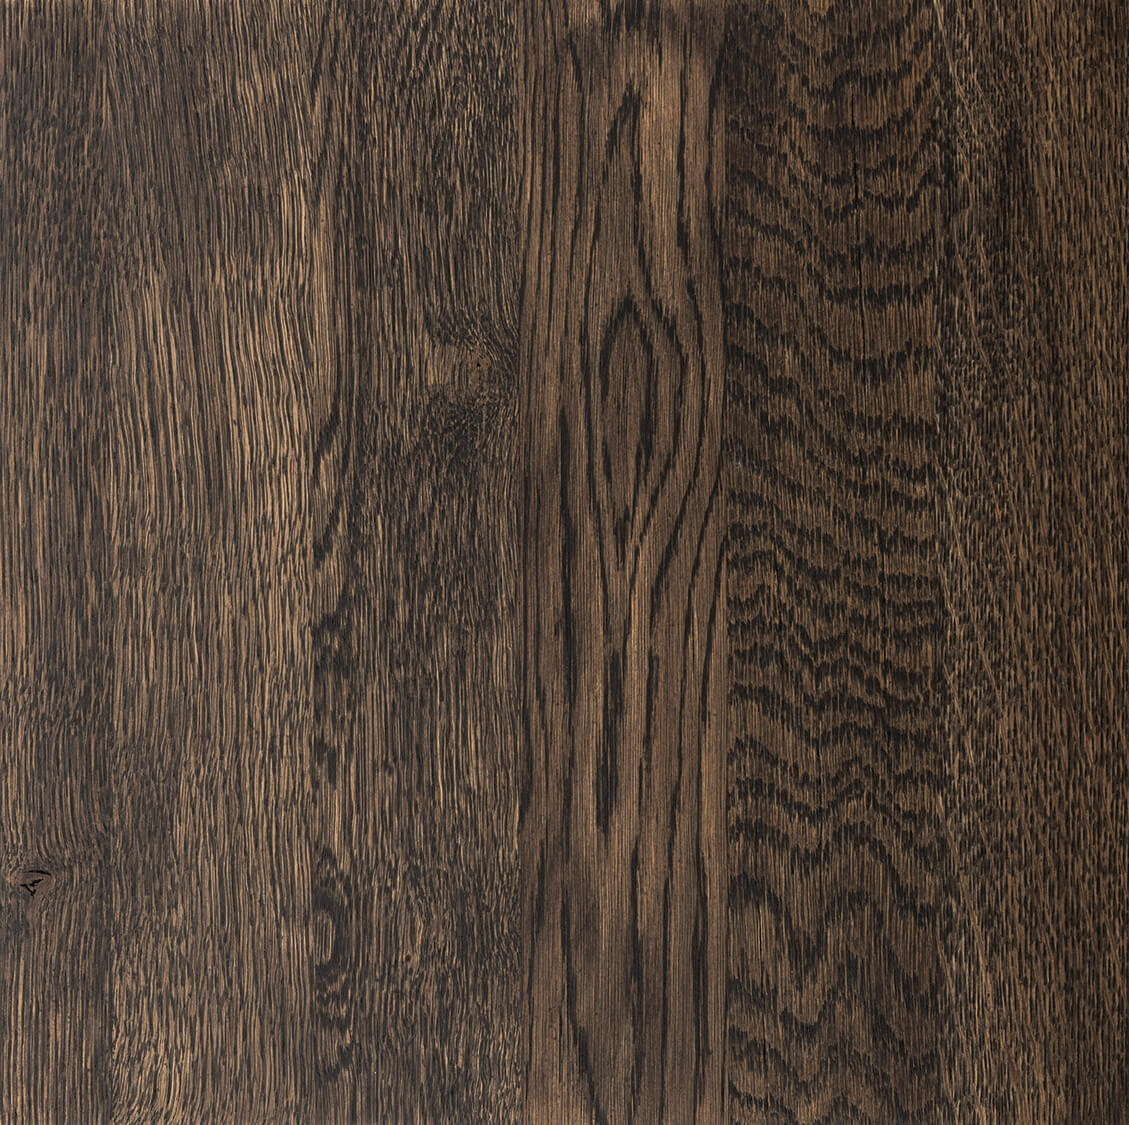 Oak carbon stained